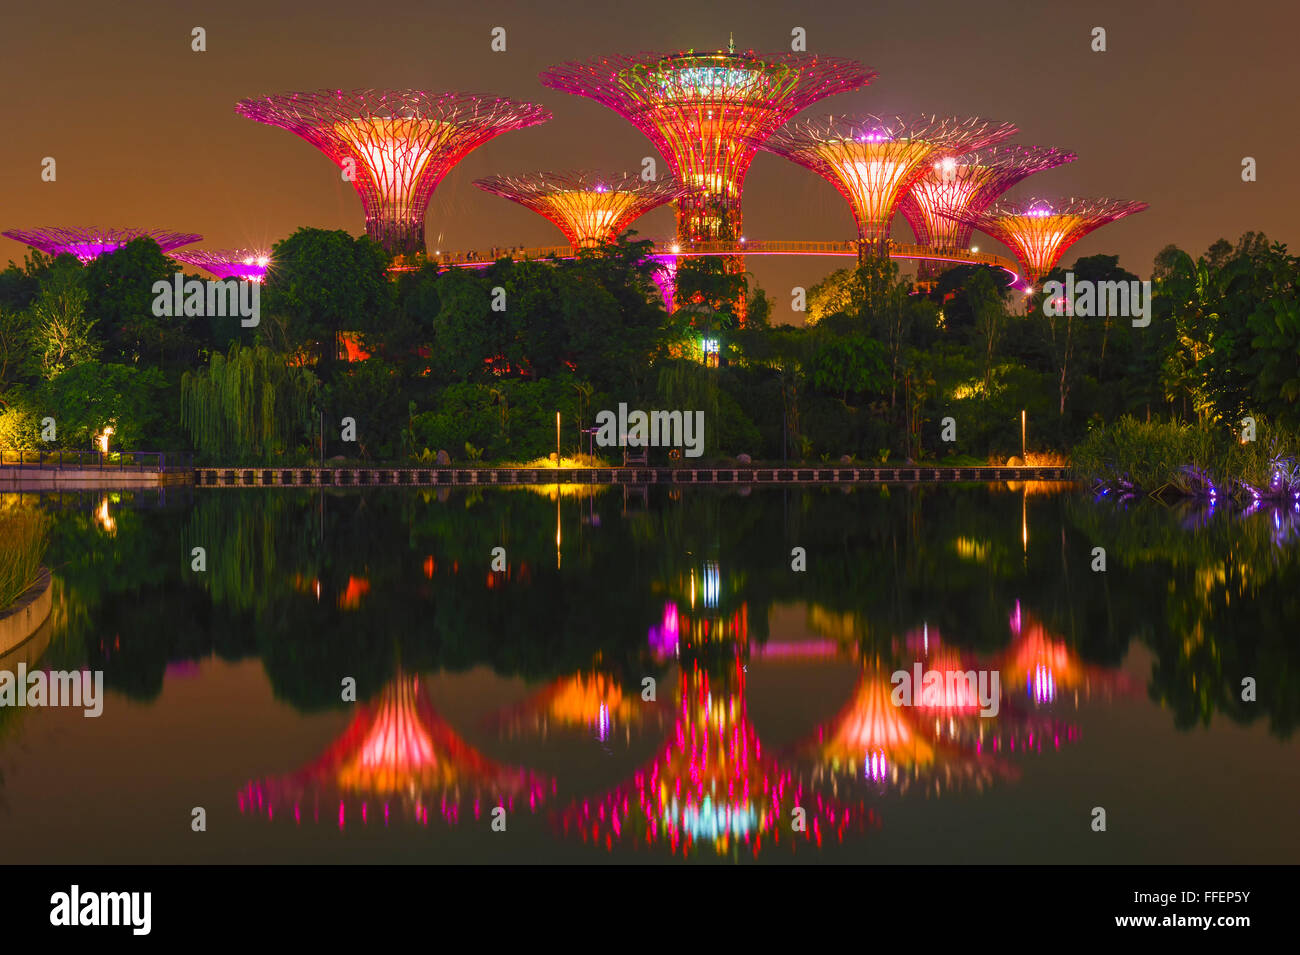 Gardens by the Bay, reflecting in water at night, Singapore, Asia Stock Photo